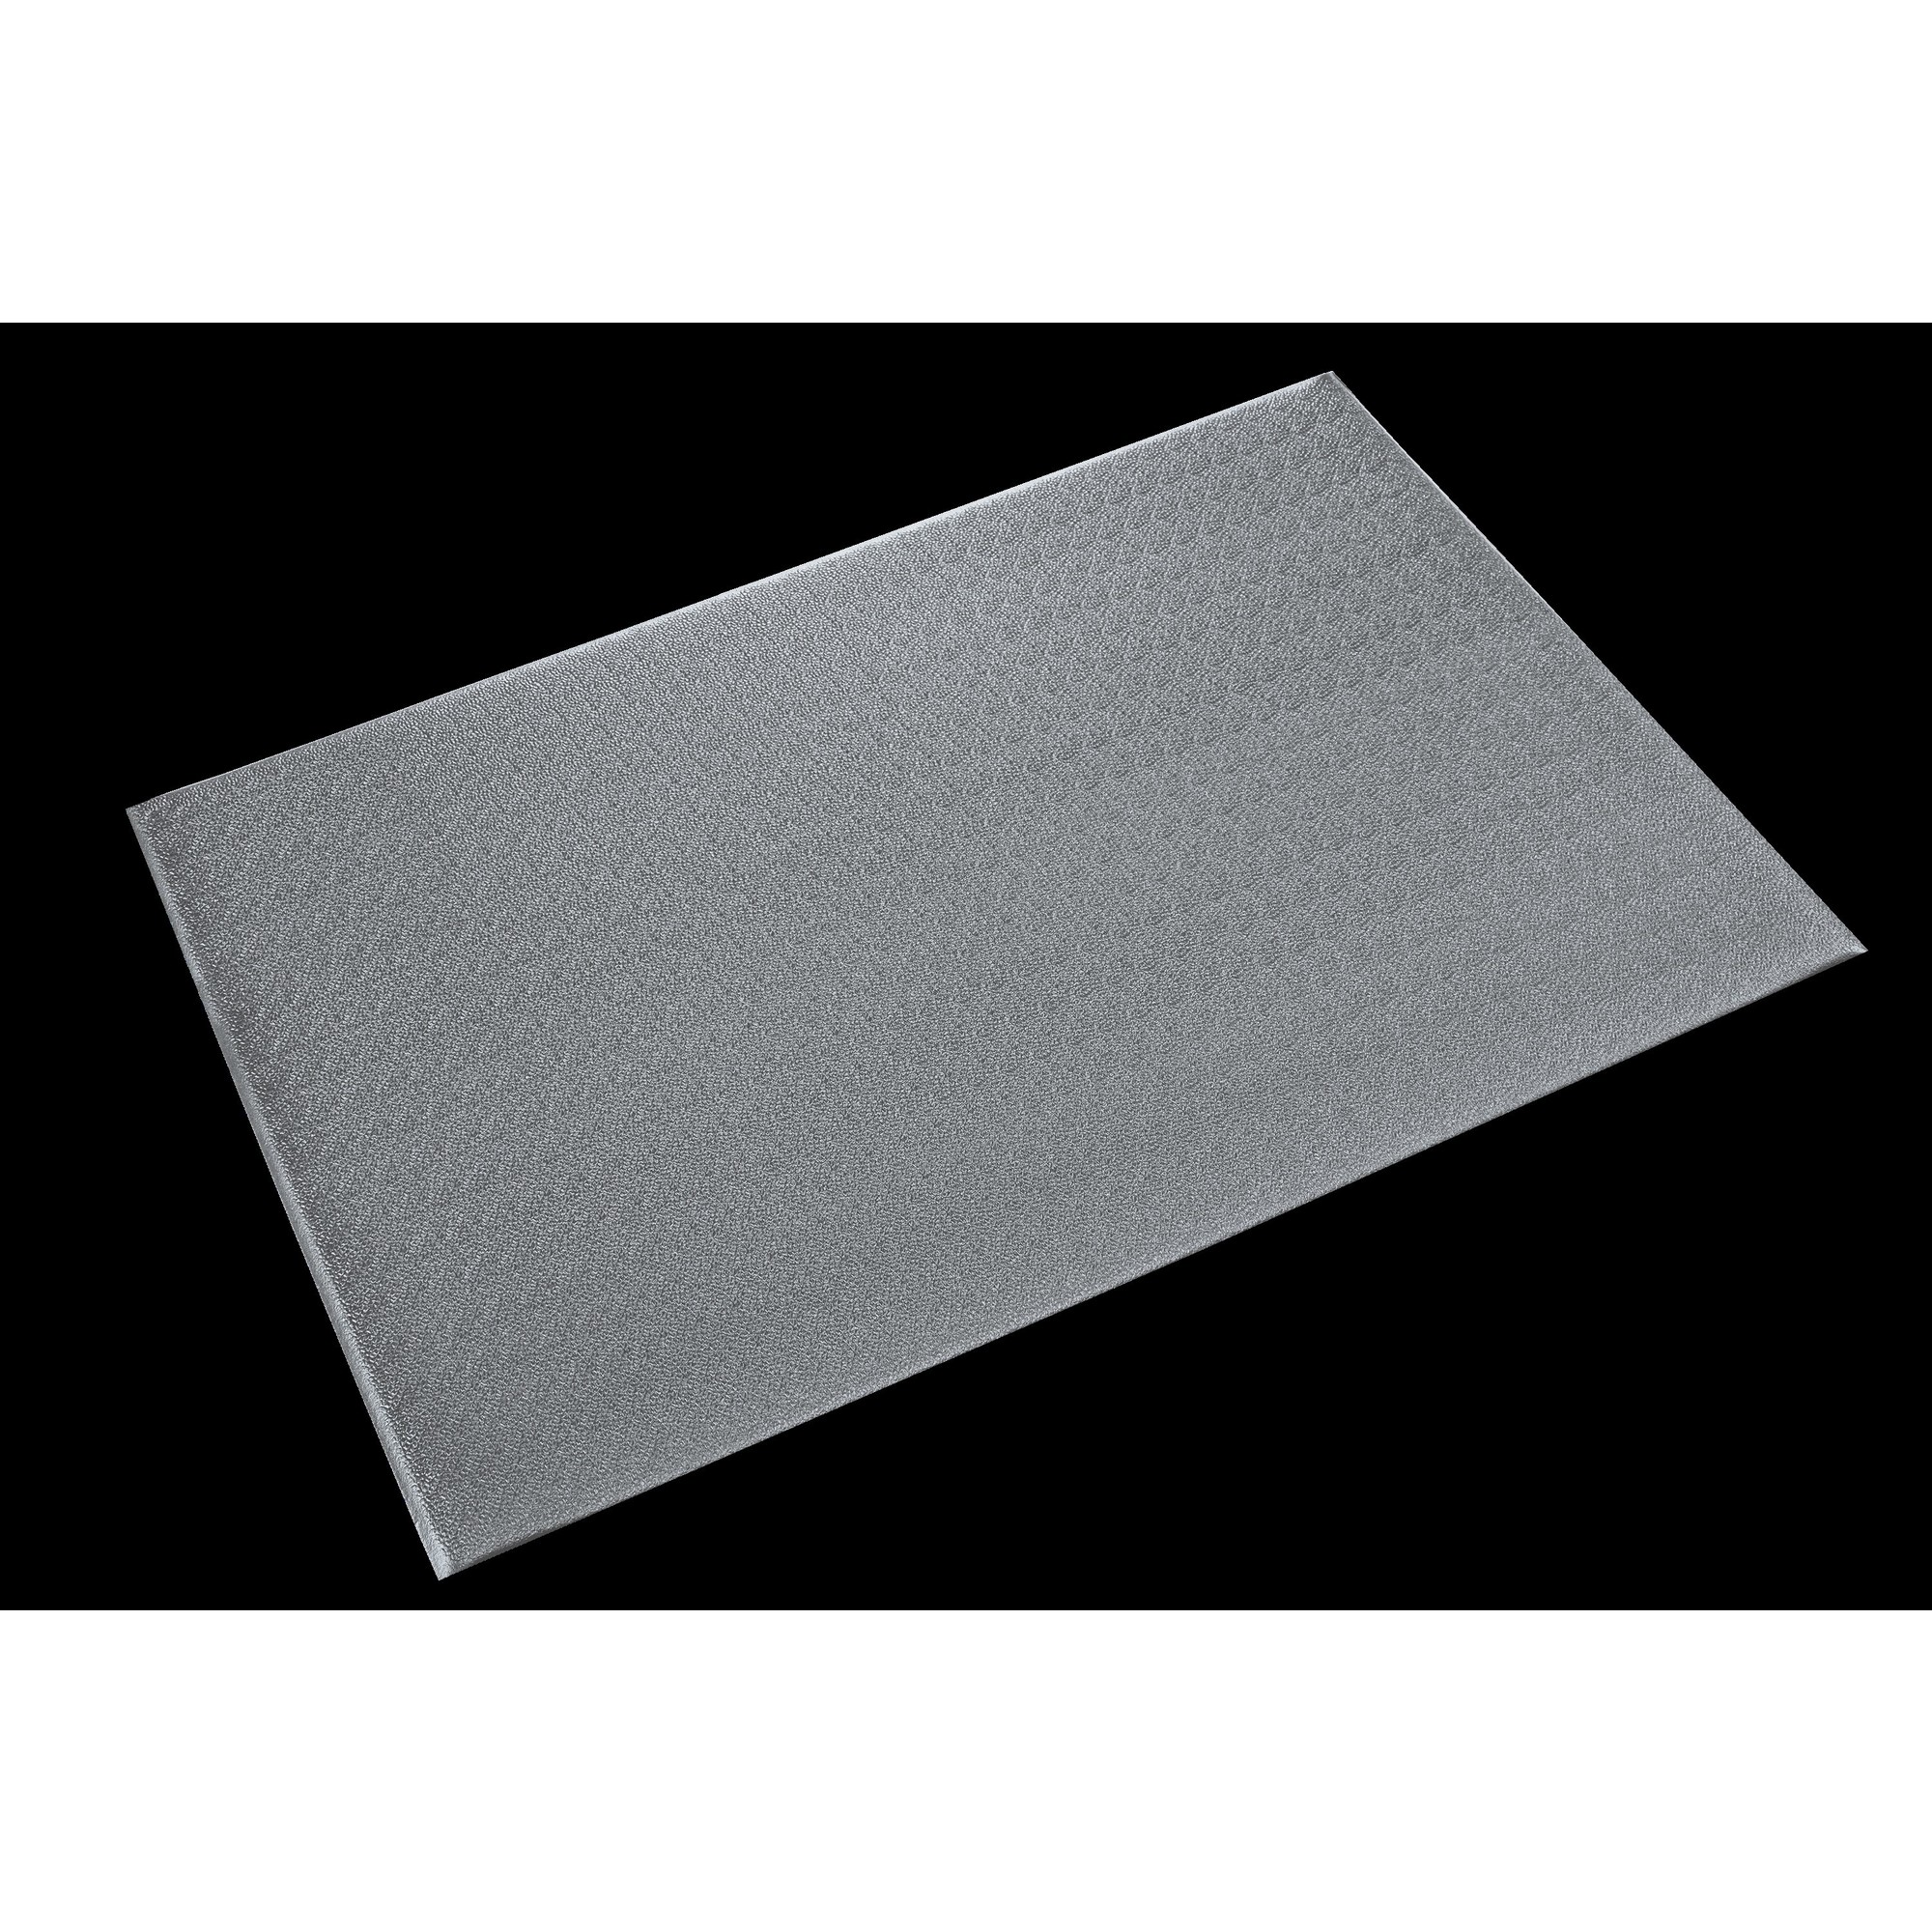 Crown Matting Technologies, Comfort-King 1/2 3ft.x5ft. Steel Gray, Width 36 in, Length 60 in, Thickness 1/2 in, Model K4 0035GY